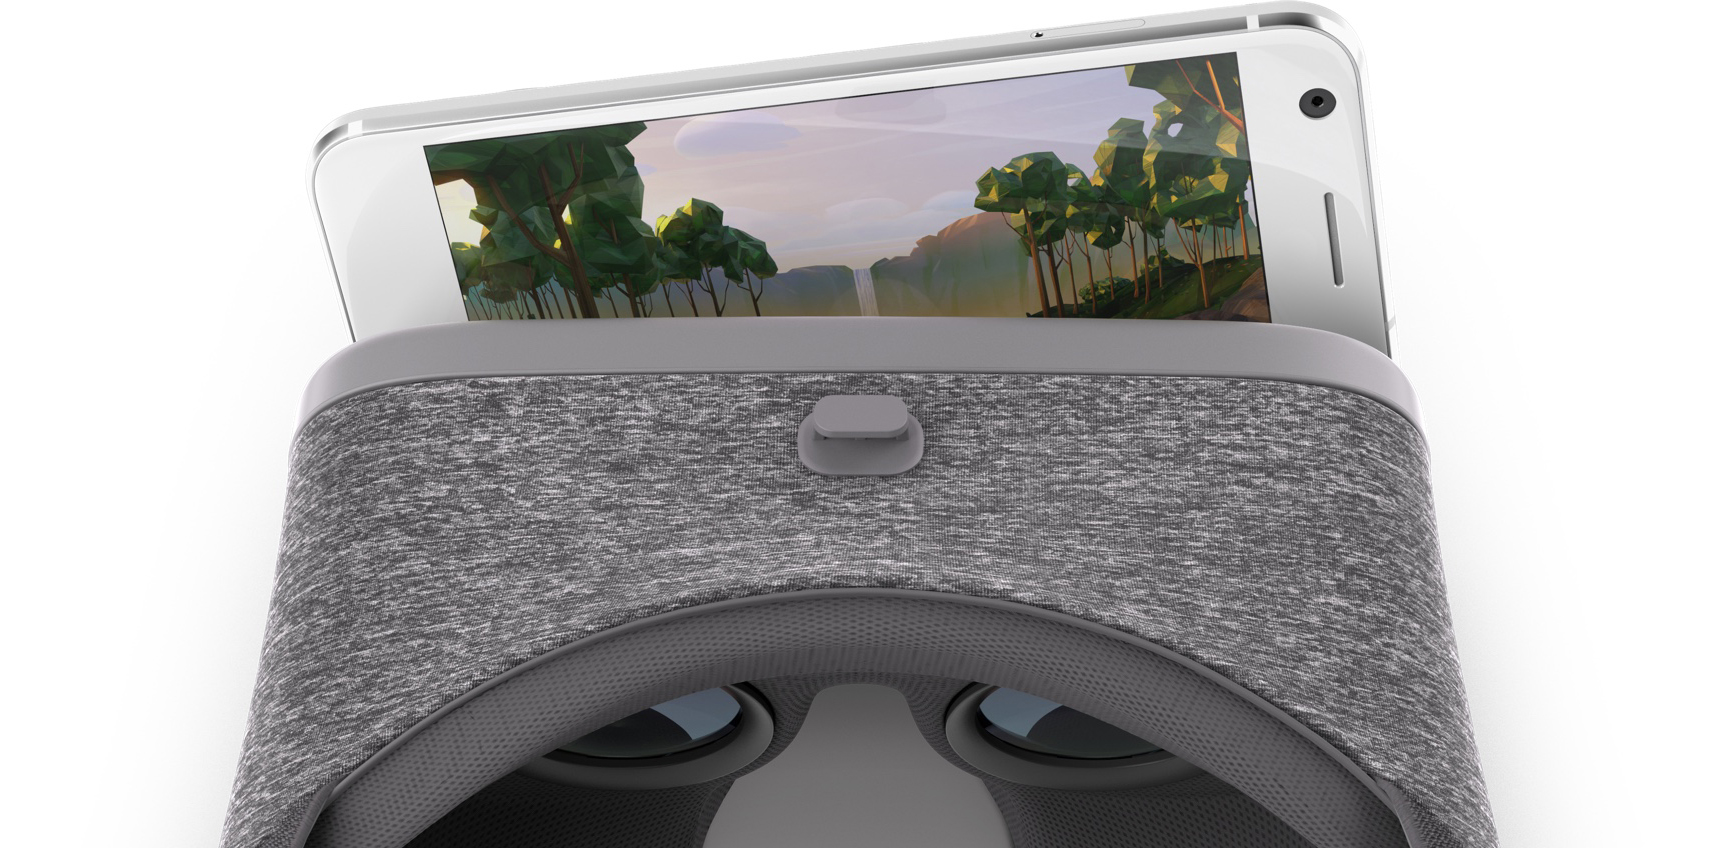 daydream vr review